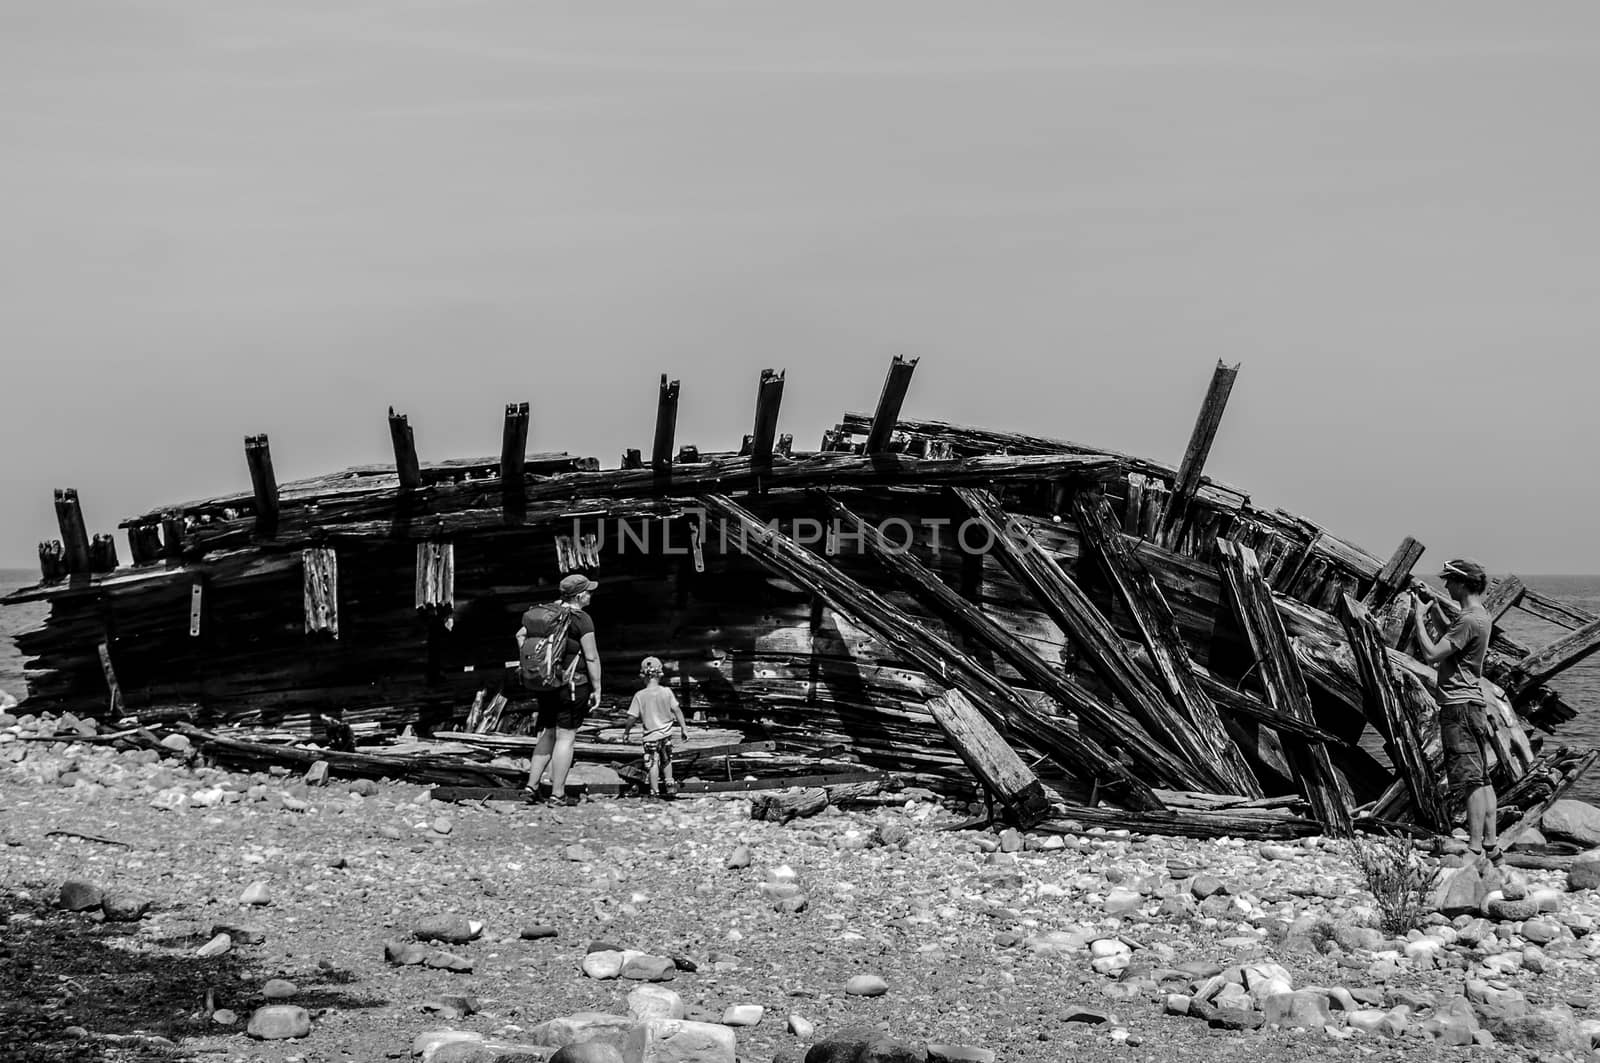 An abandoned wooden boat by arvidnorberg